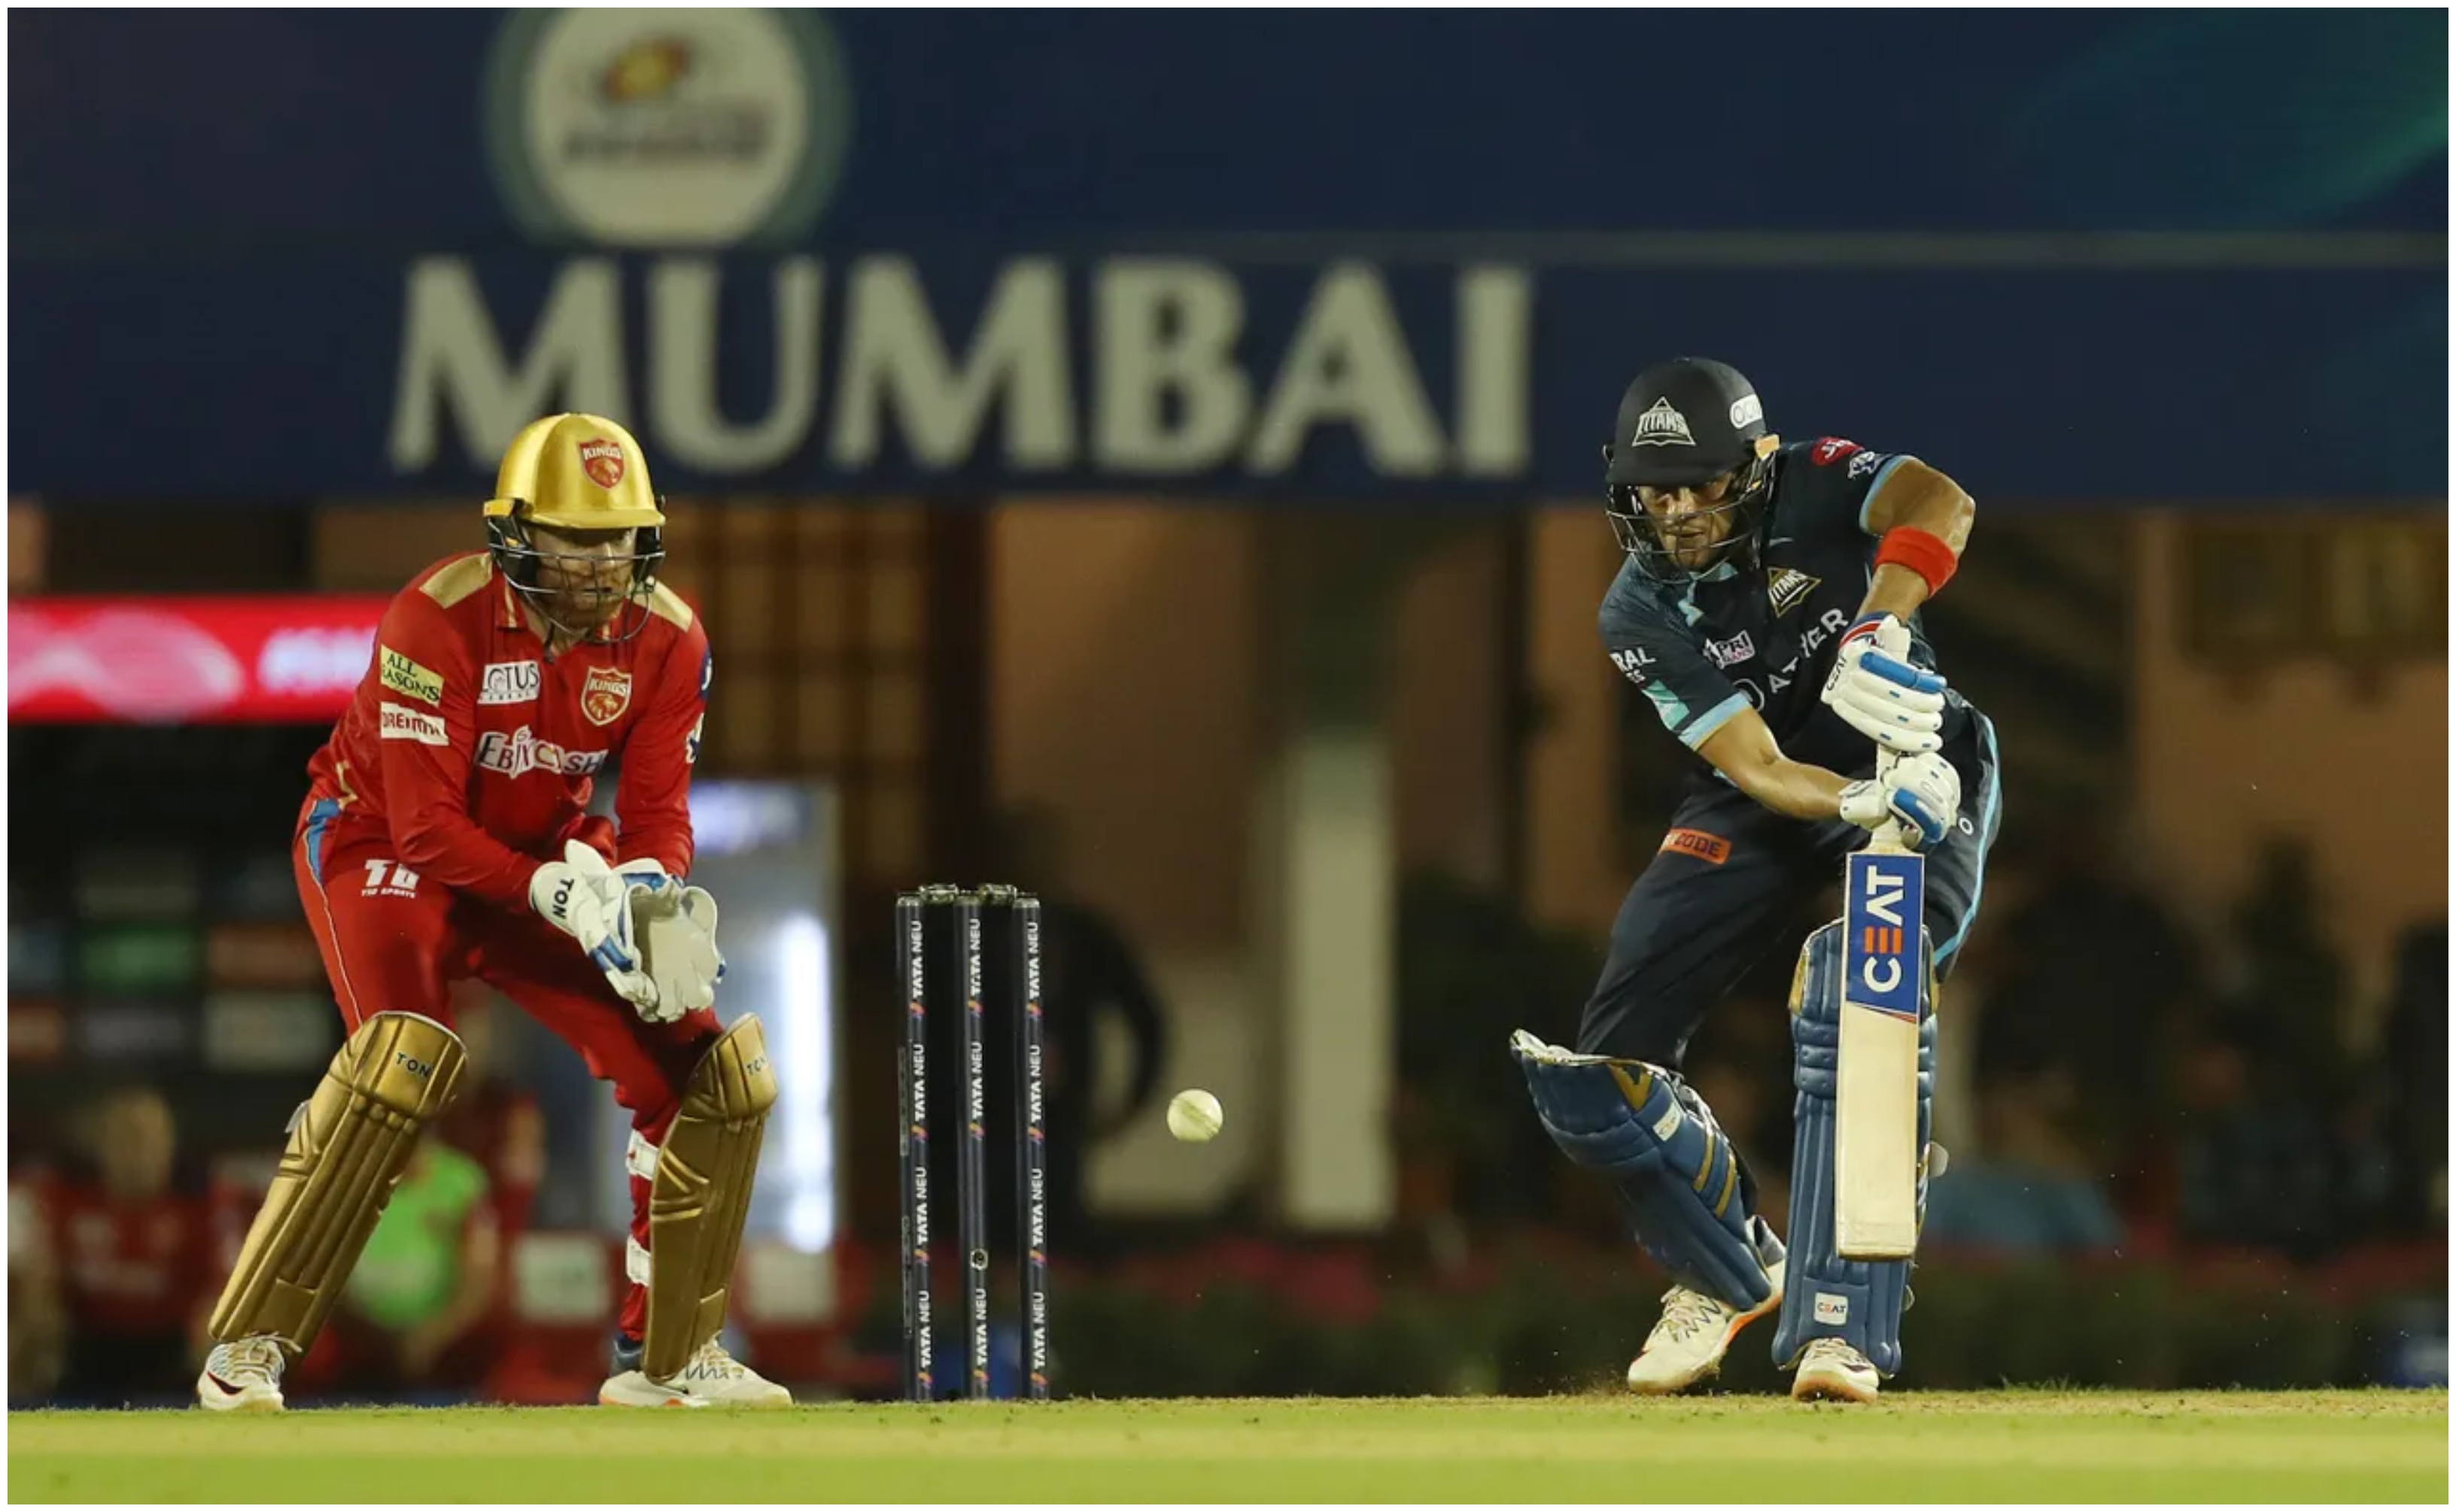 Shubman Gill top scored for GT with 96 | BCCI/IPL